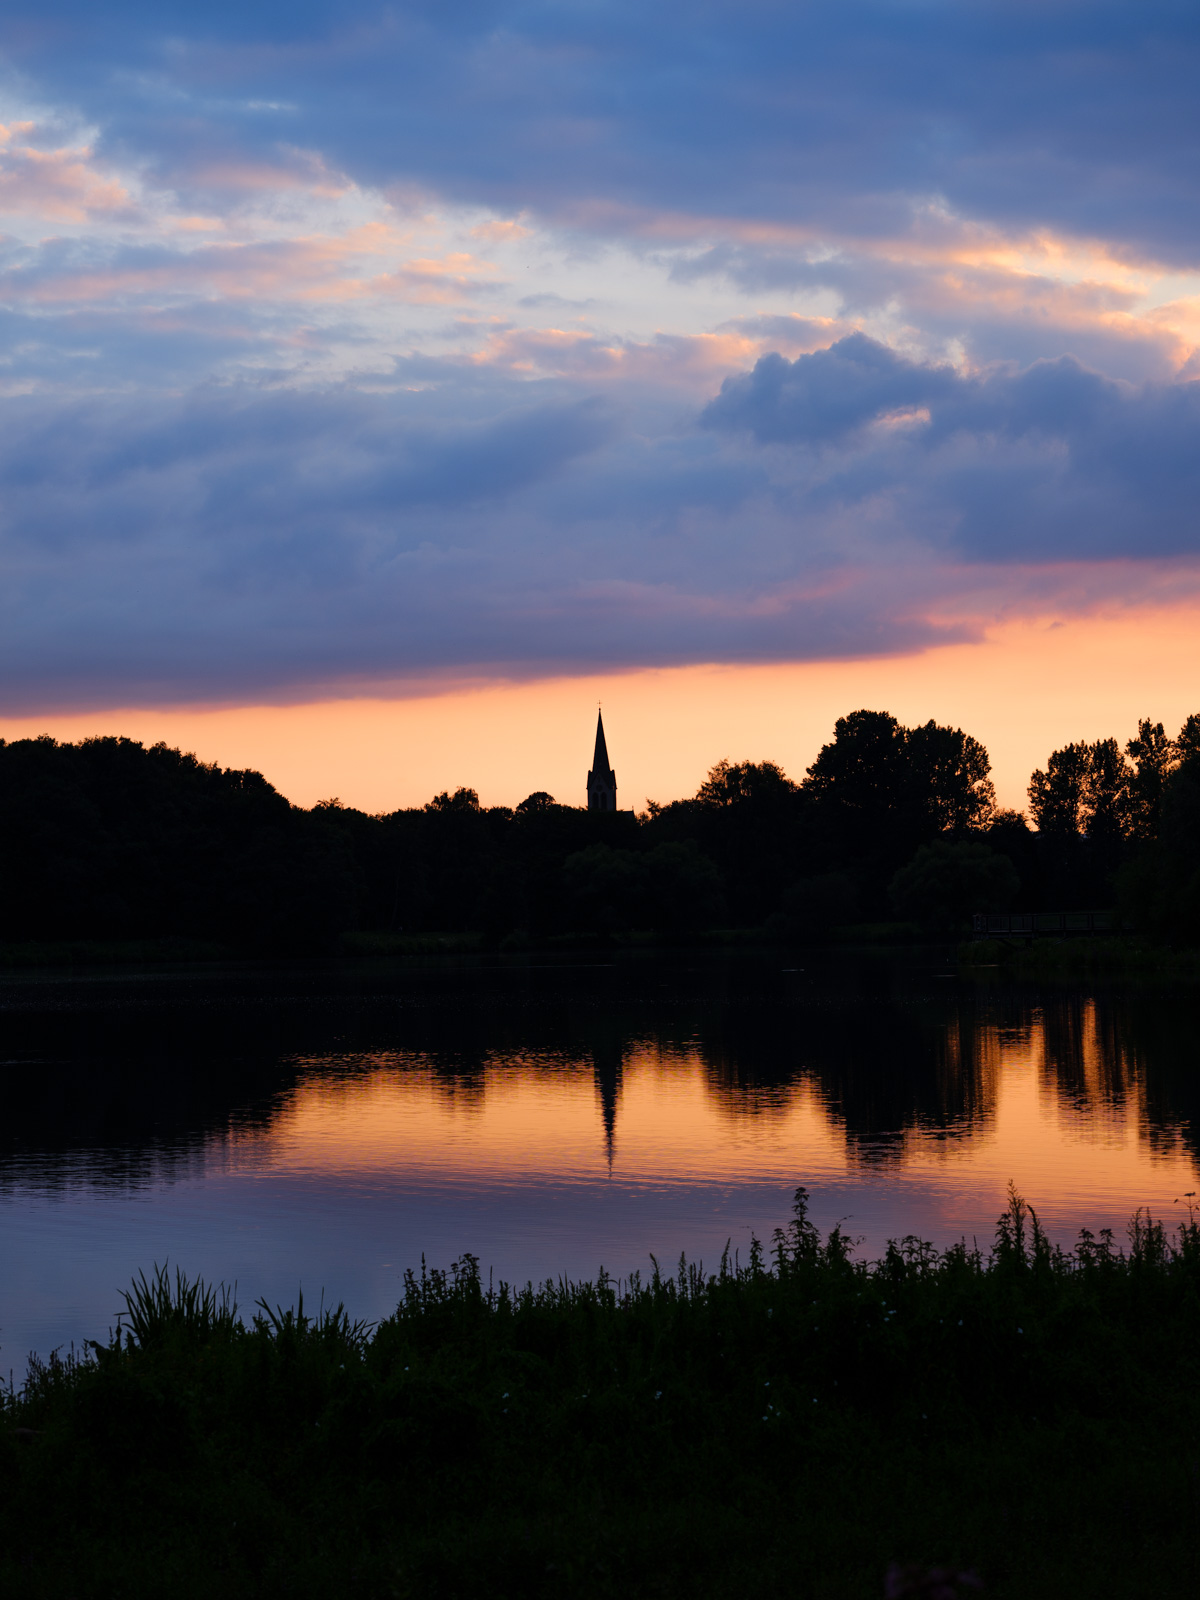 Summer evening at 'Obersee' in July 2020 (Bielefeld, Germany).